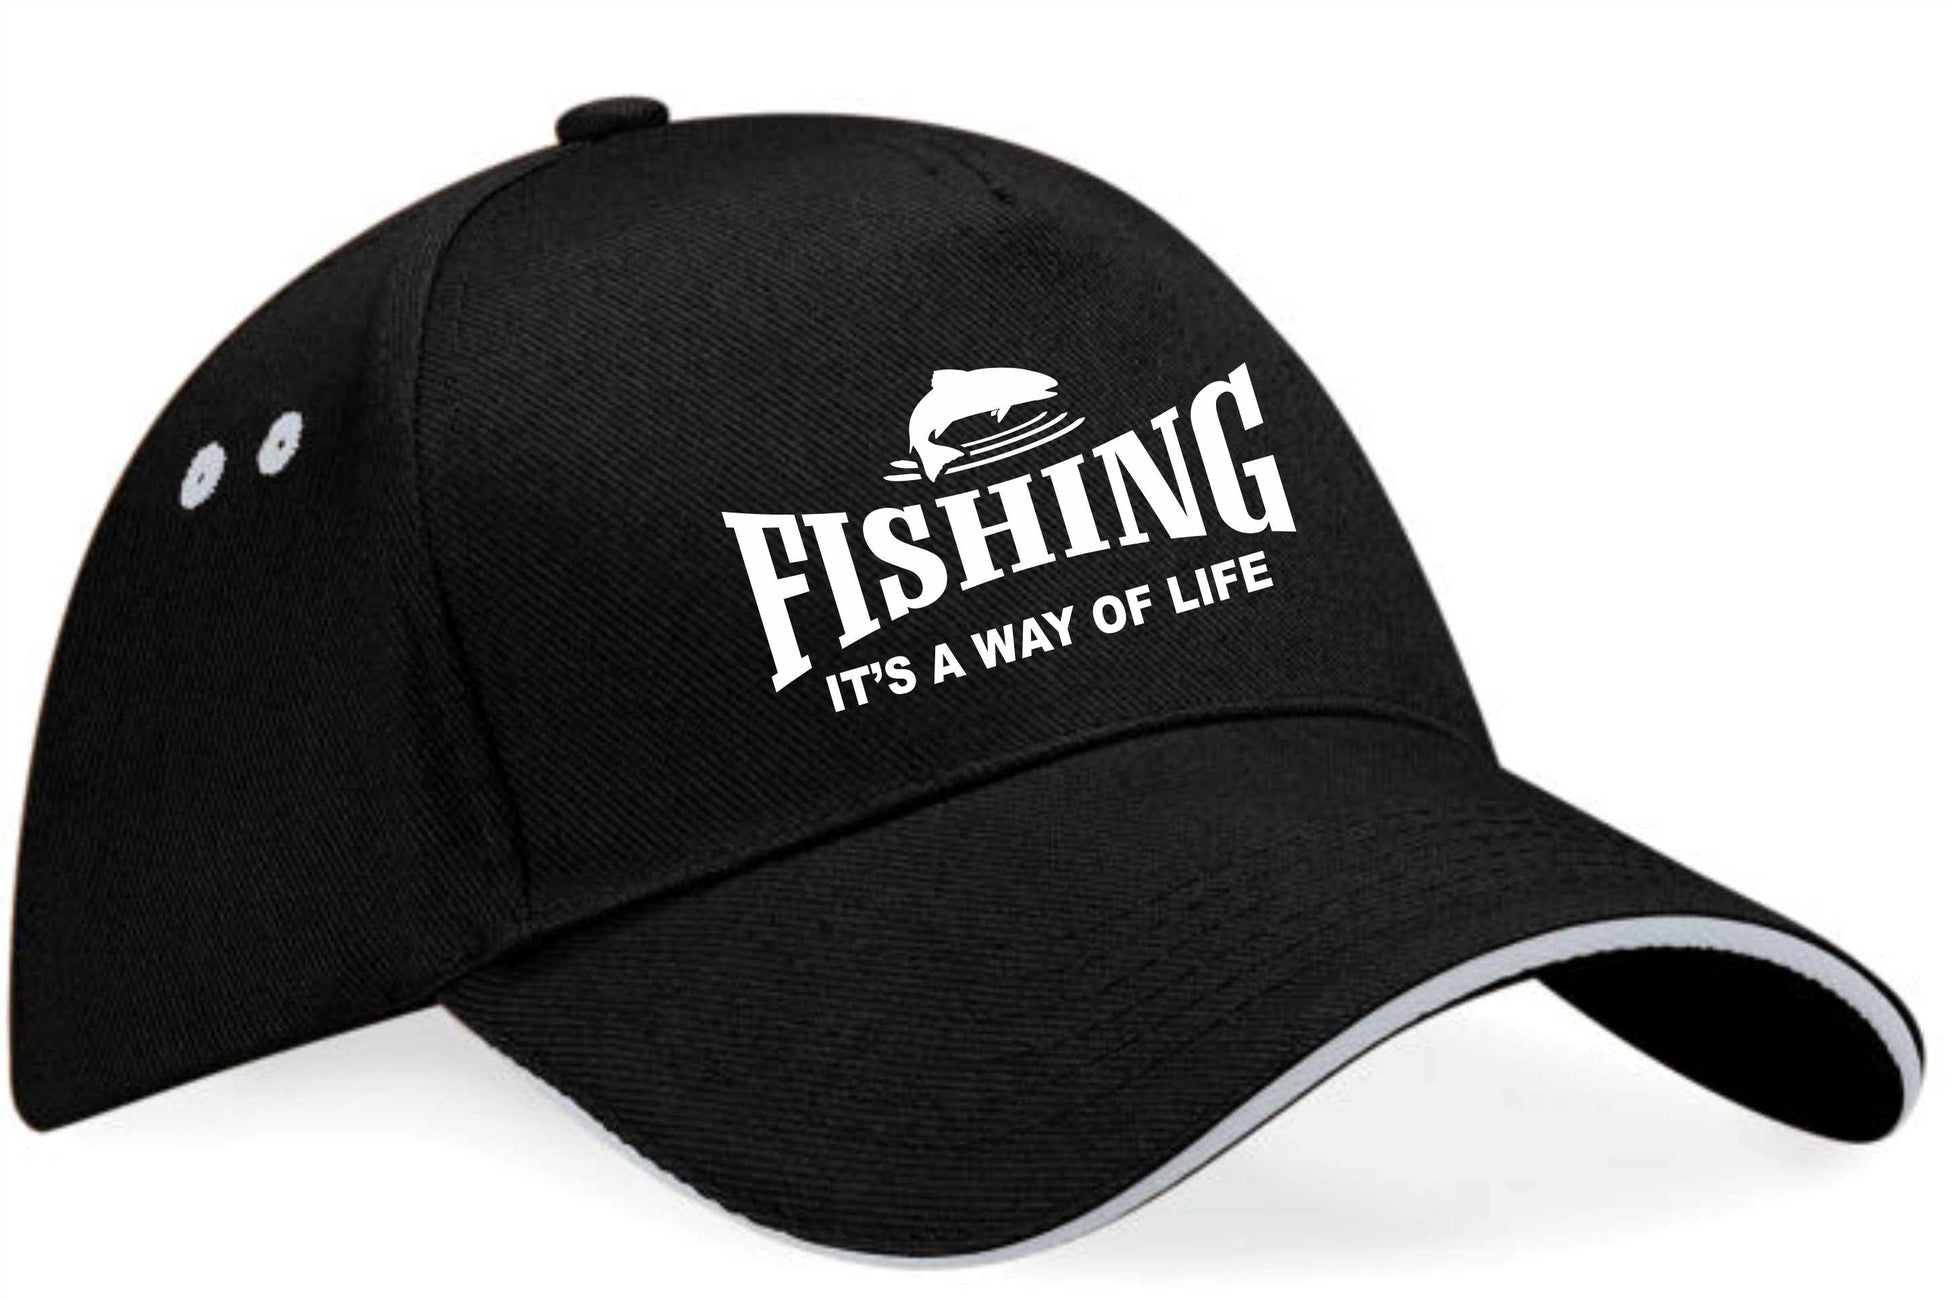 Fishing It's A Way of Life Baseball Cap Anglers Sports Gift For Men & Ladies Grey